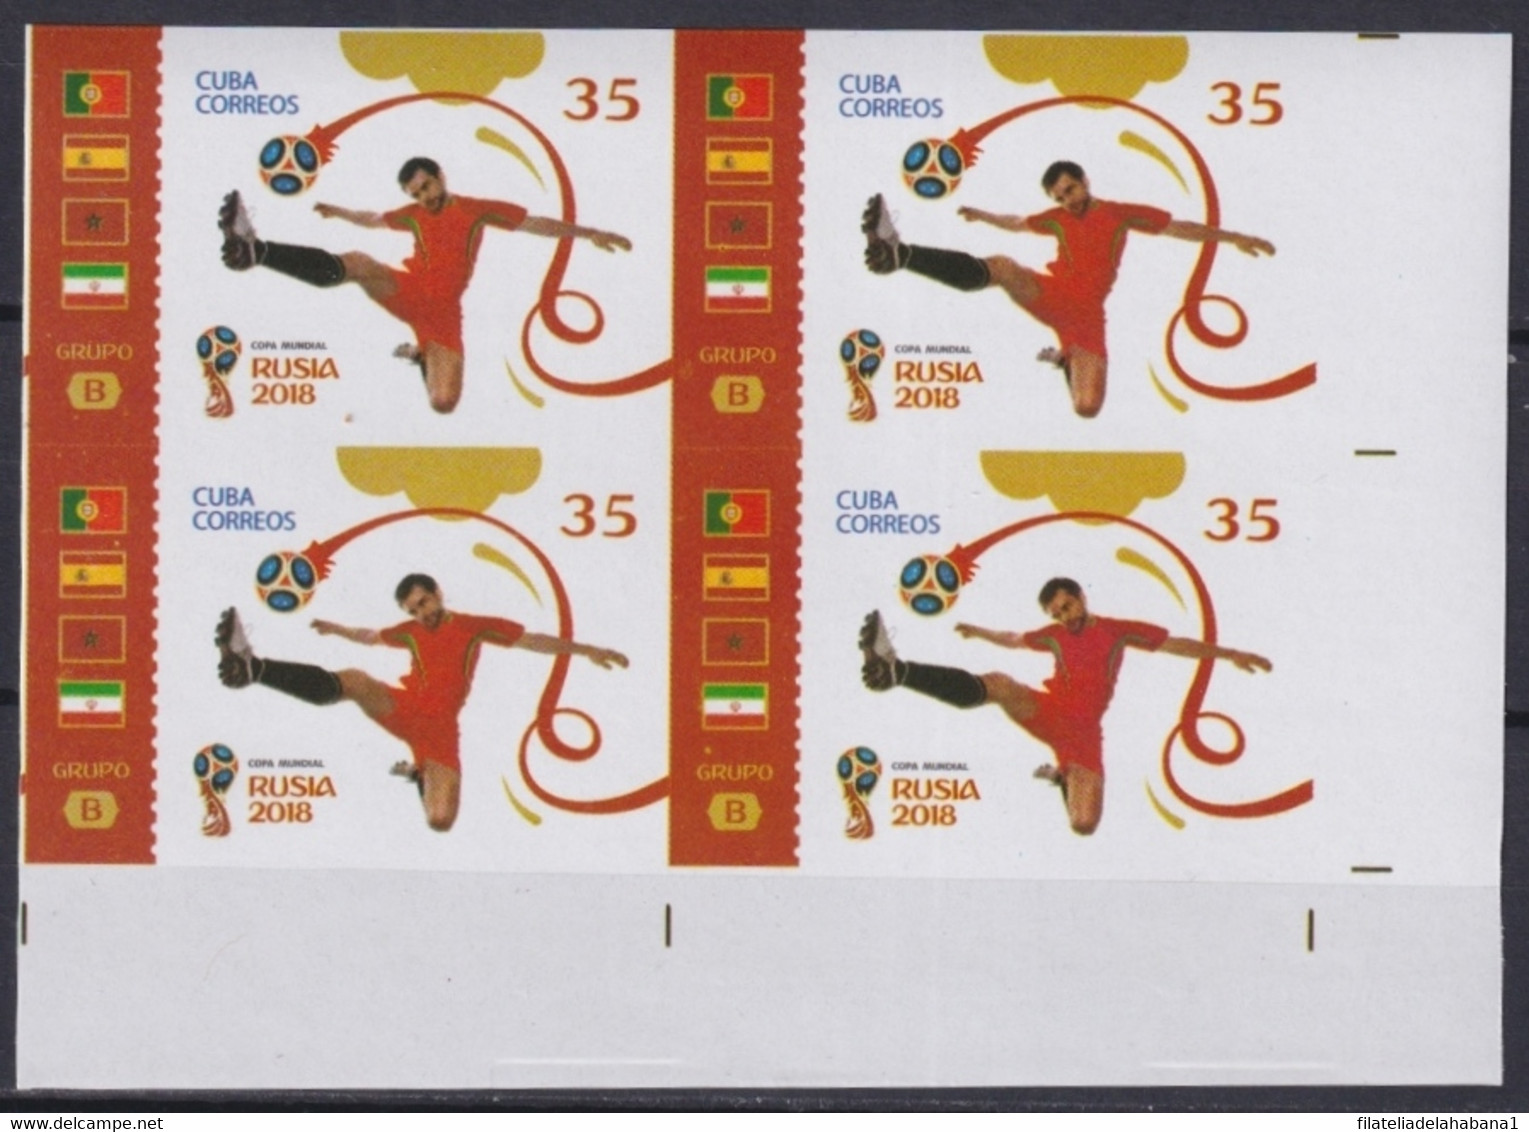 2018.215 CUBA MNH 2018 IMPERFORATED PROOF 35c RUSSIA WORLD SOCCER CHAMPIONSHIP. - Imperforates, Proofs & Errors